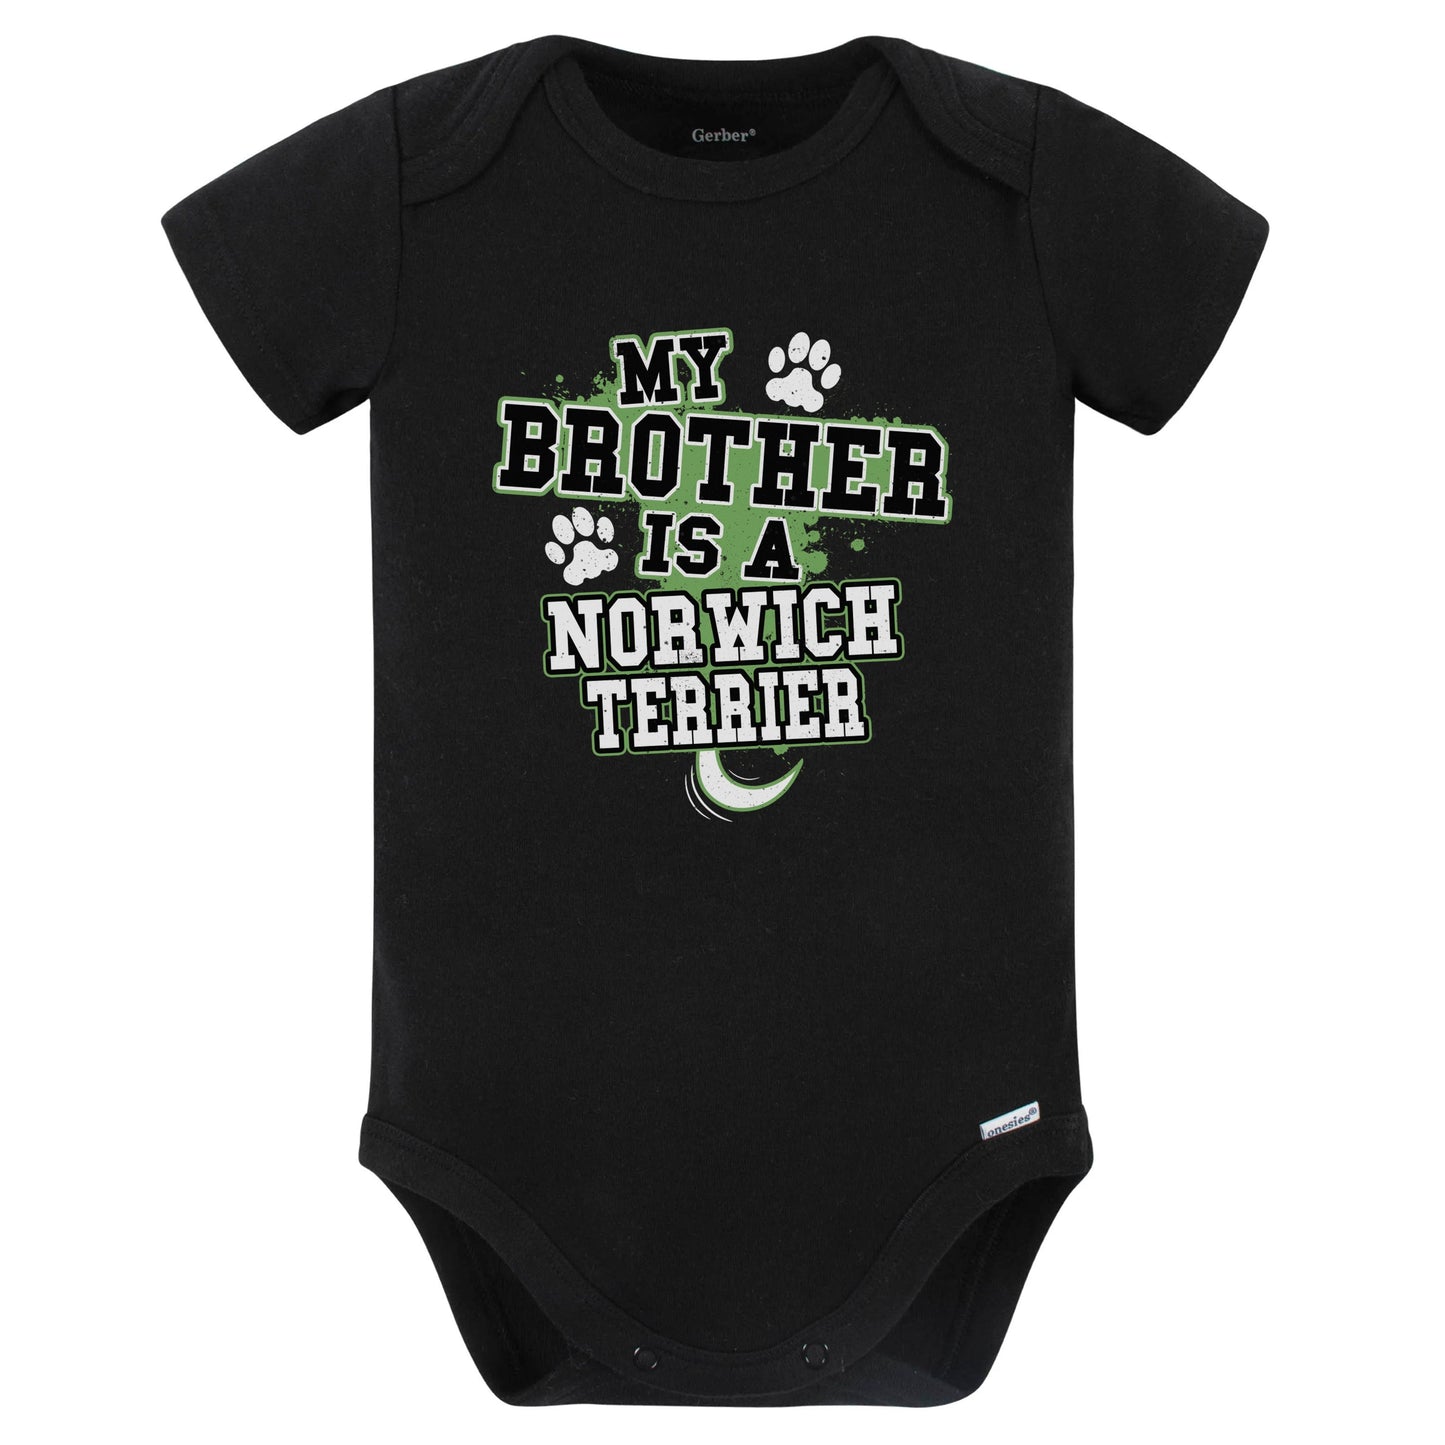 My Brother Is A Norwich Terrier Funny Baby Bodysuit (Black)